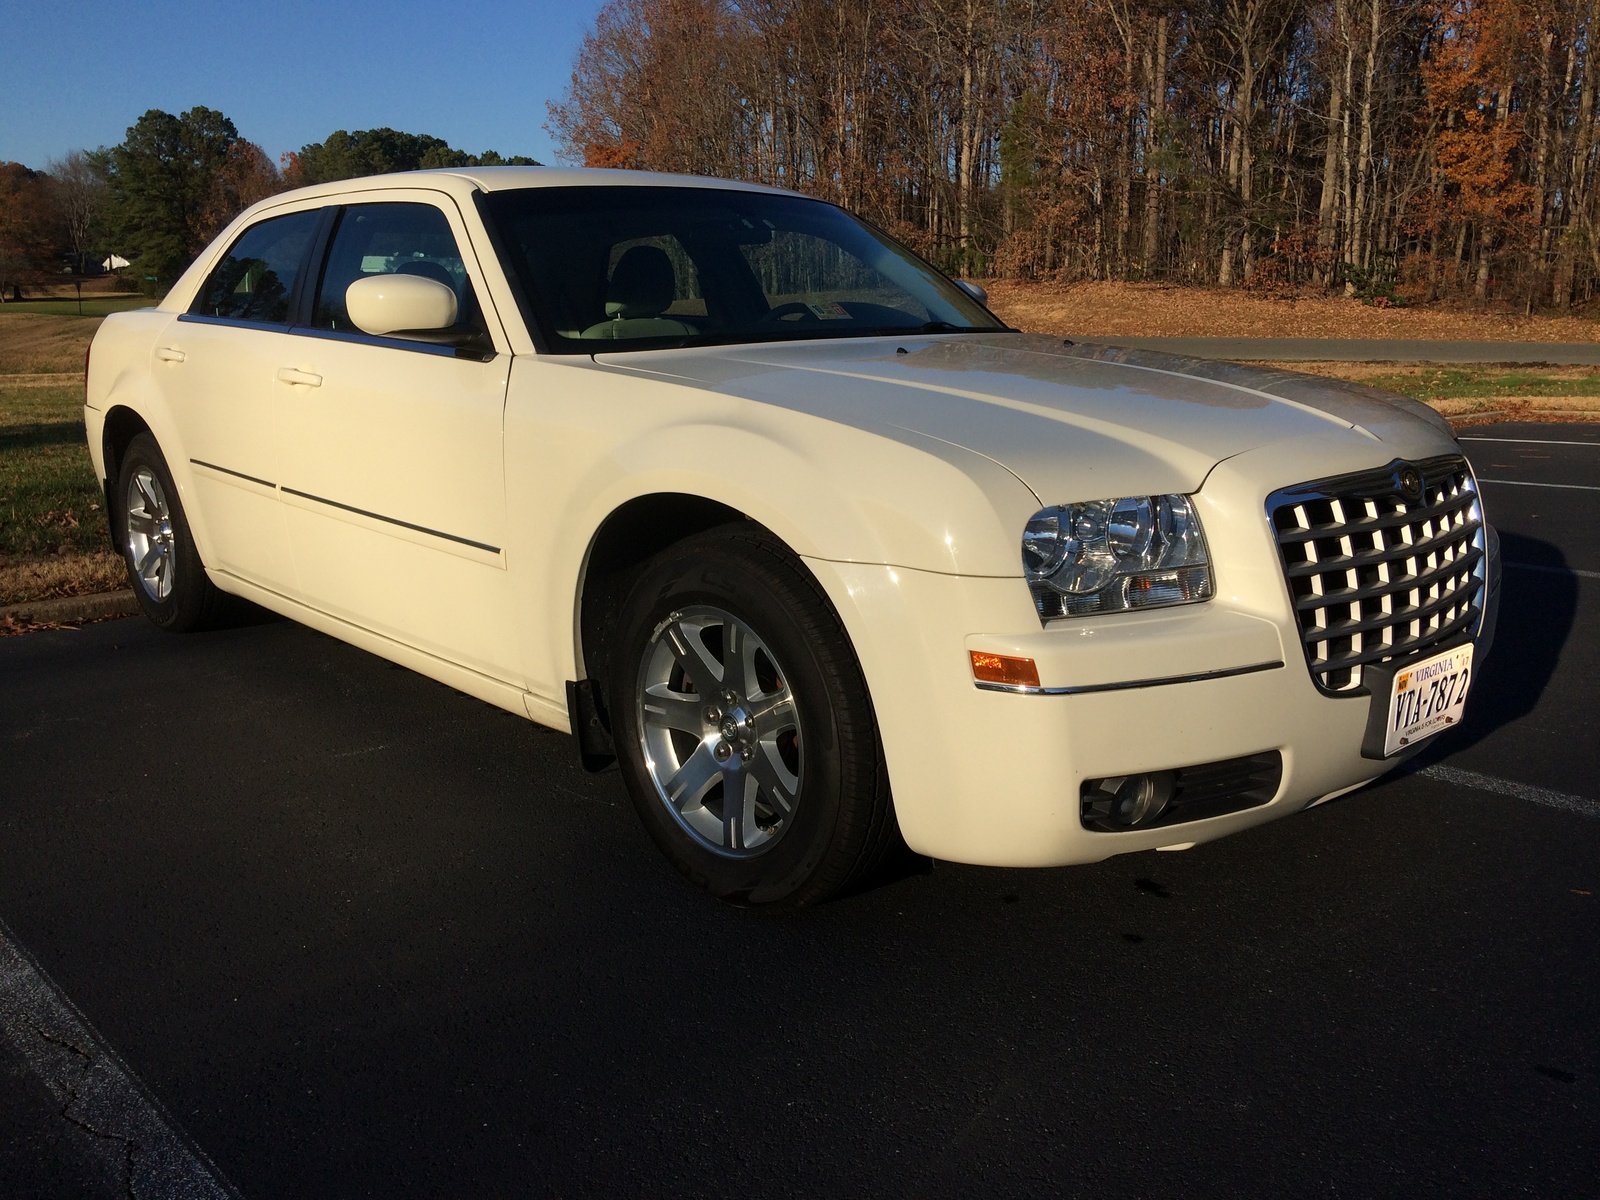 2006 Chrysler 300: Prices, Reviews & Pictures - CarGurus